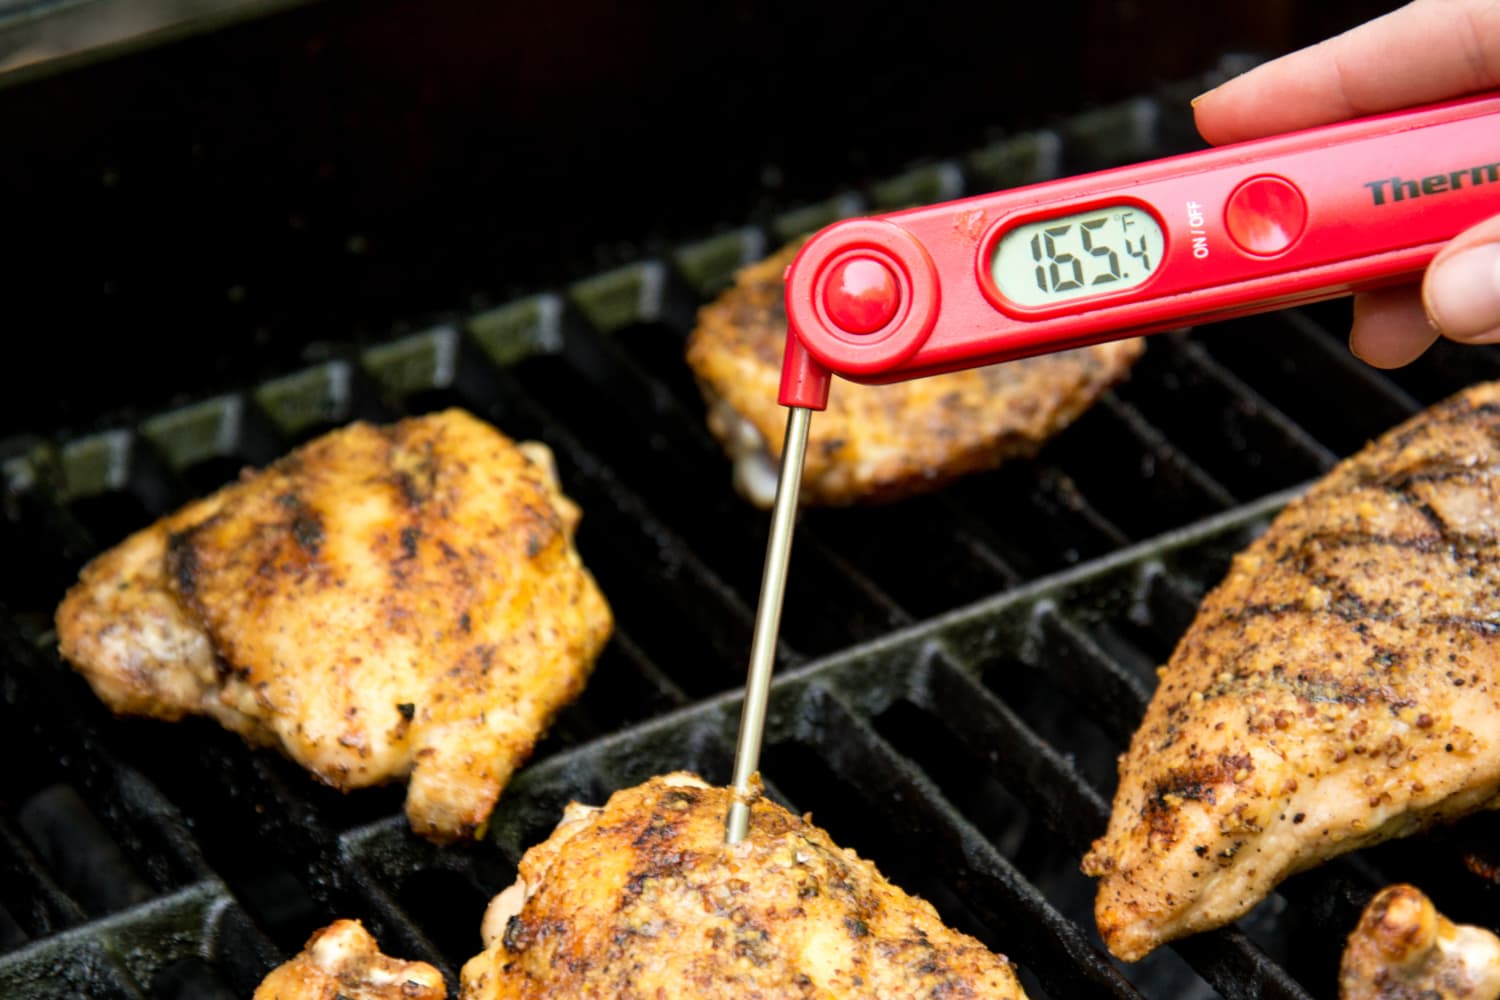 Digital Instant Read Meat Thermometer Kitchen Cooking Food Candy